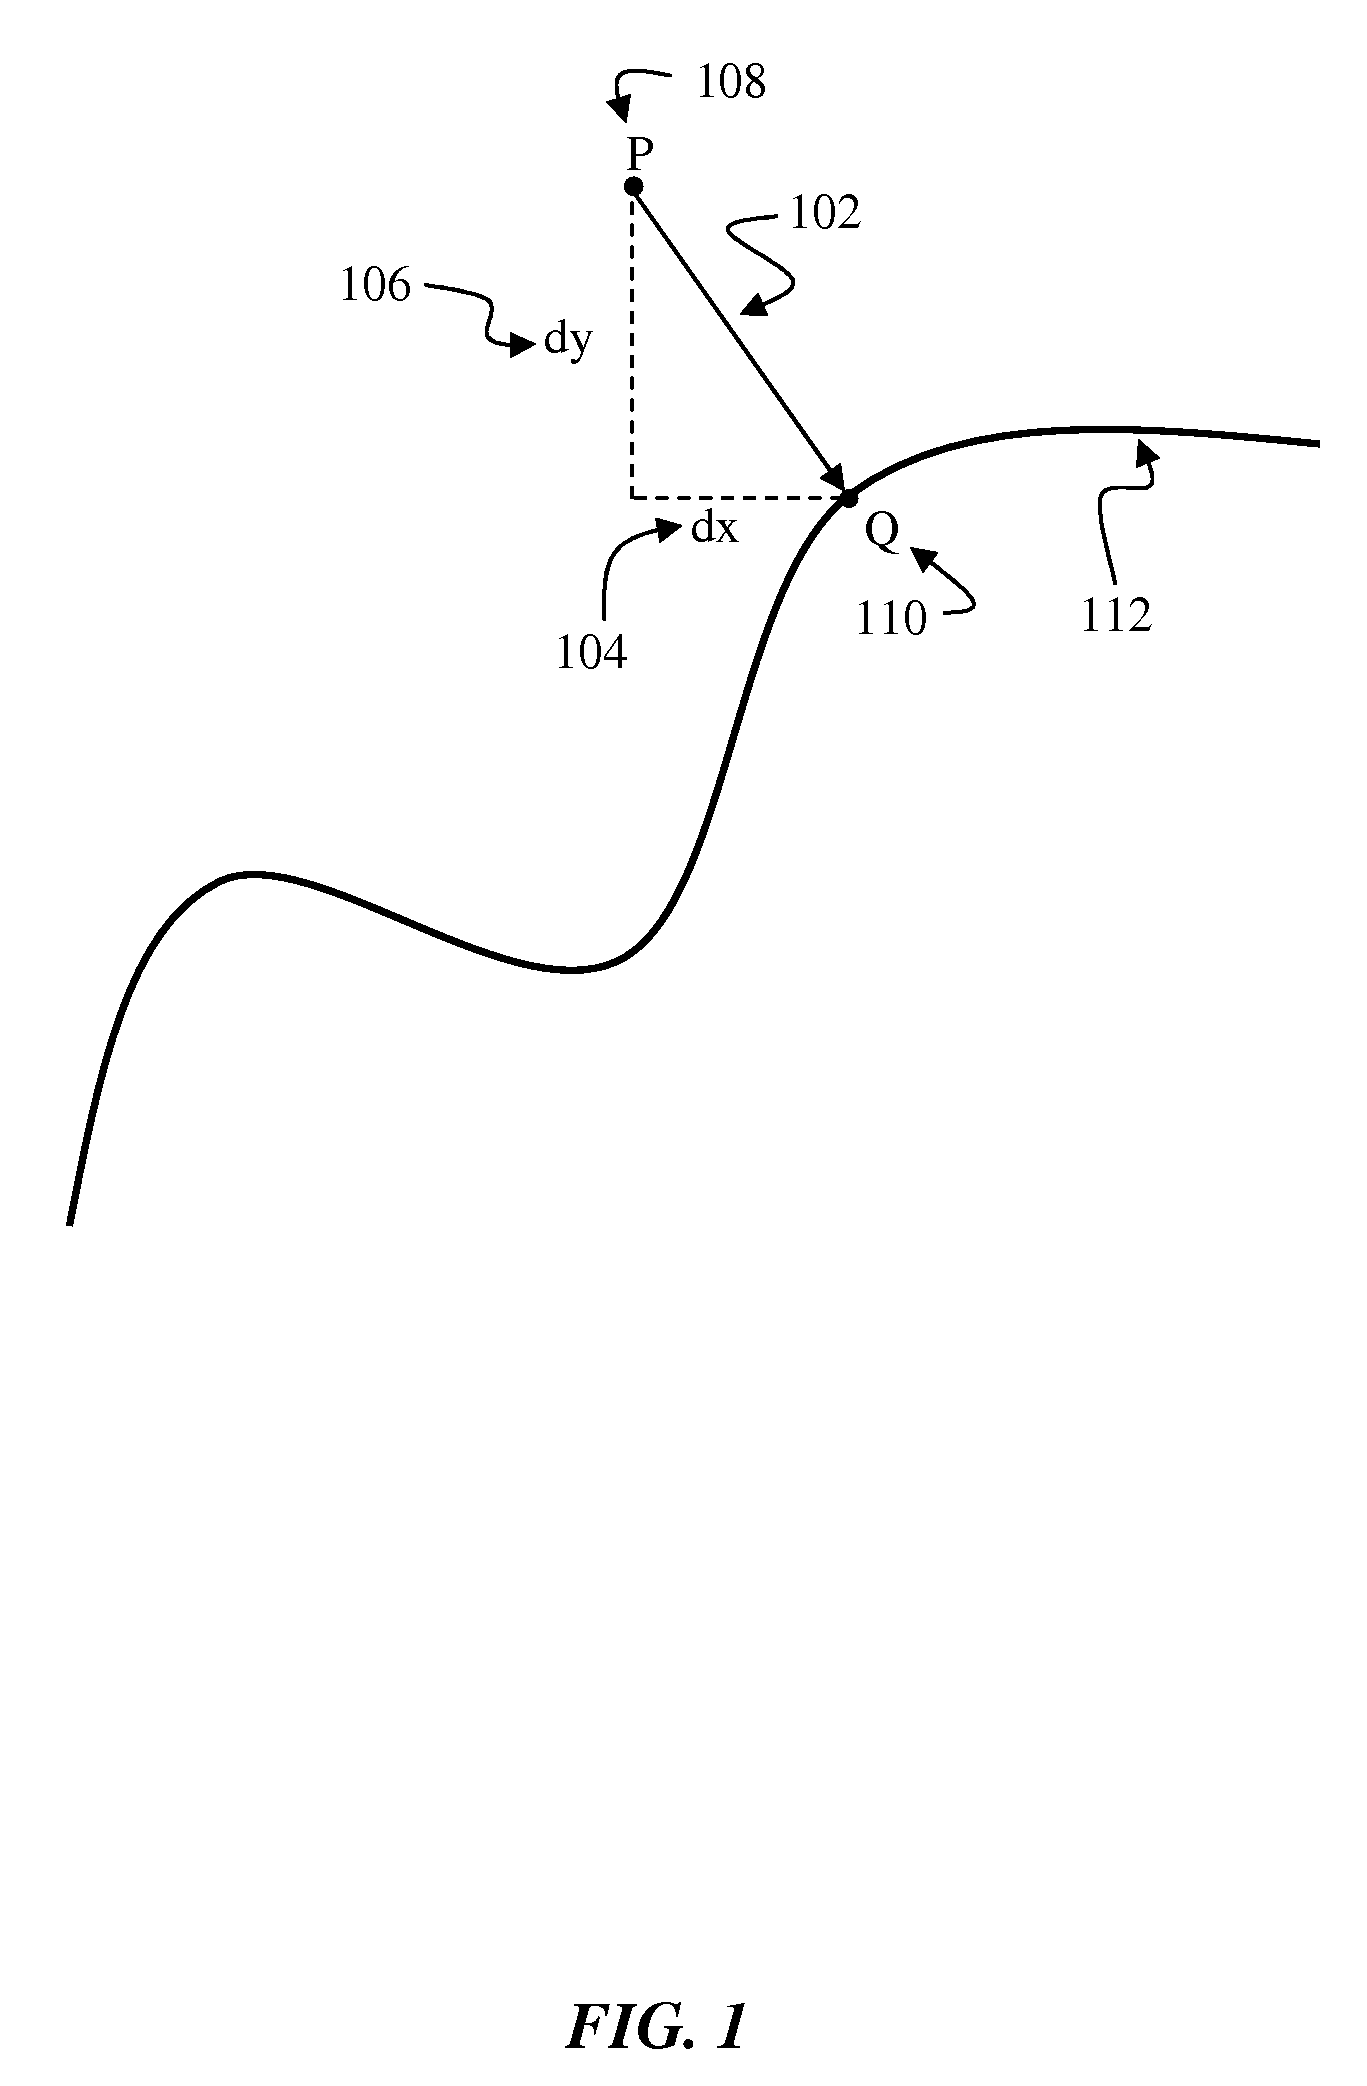 Method for recognizing a shape from a path of a digitizing device